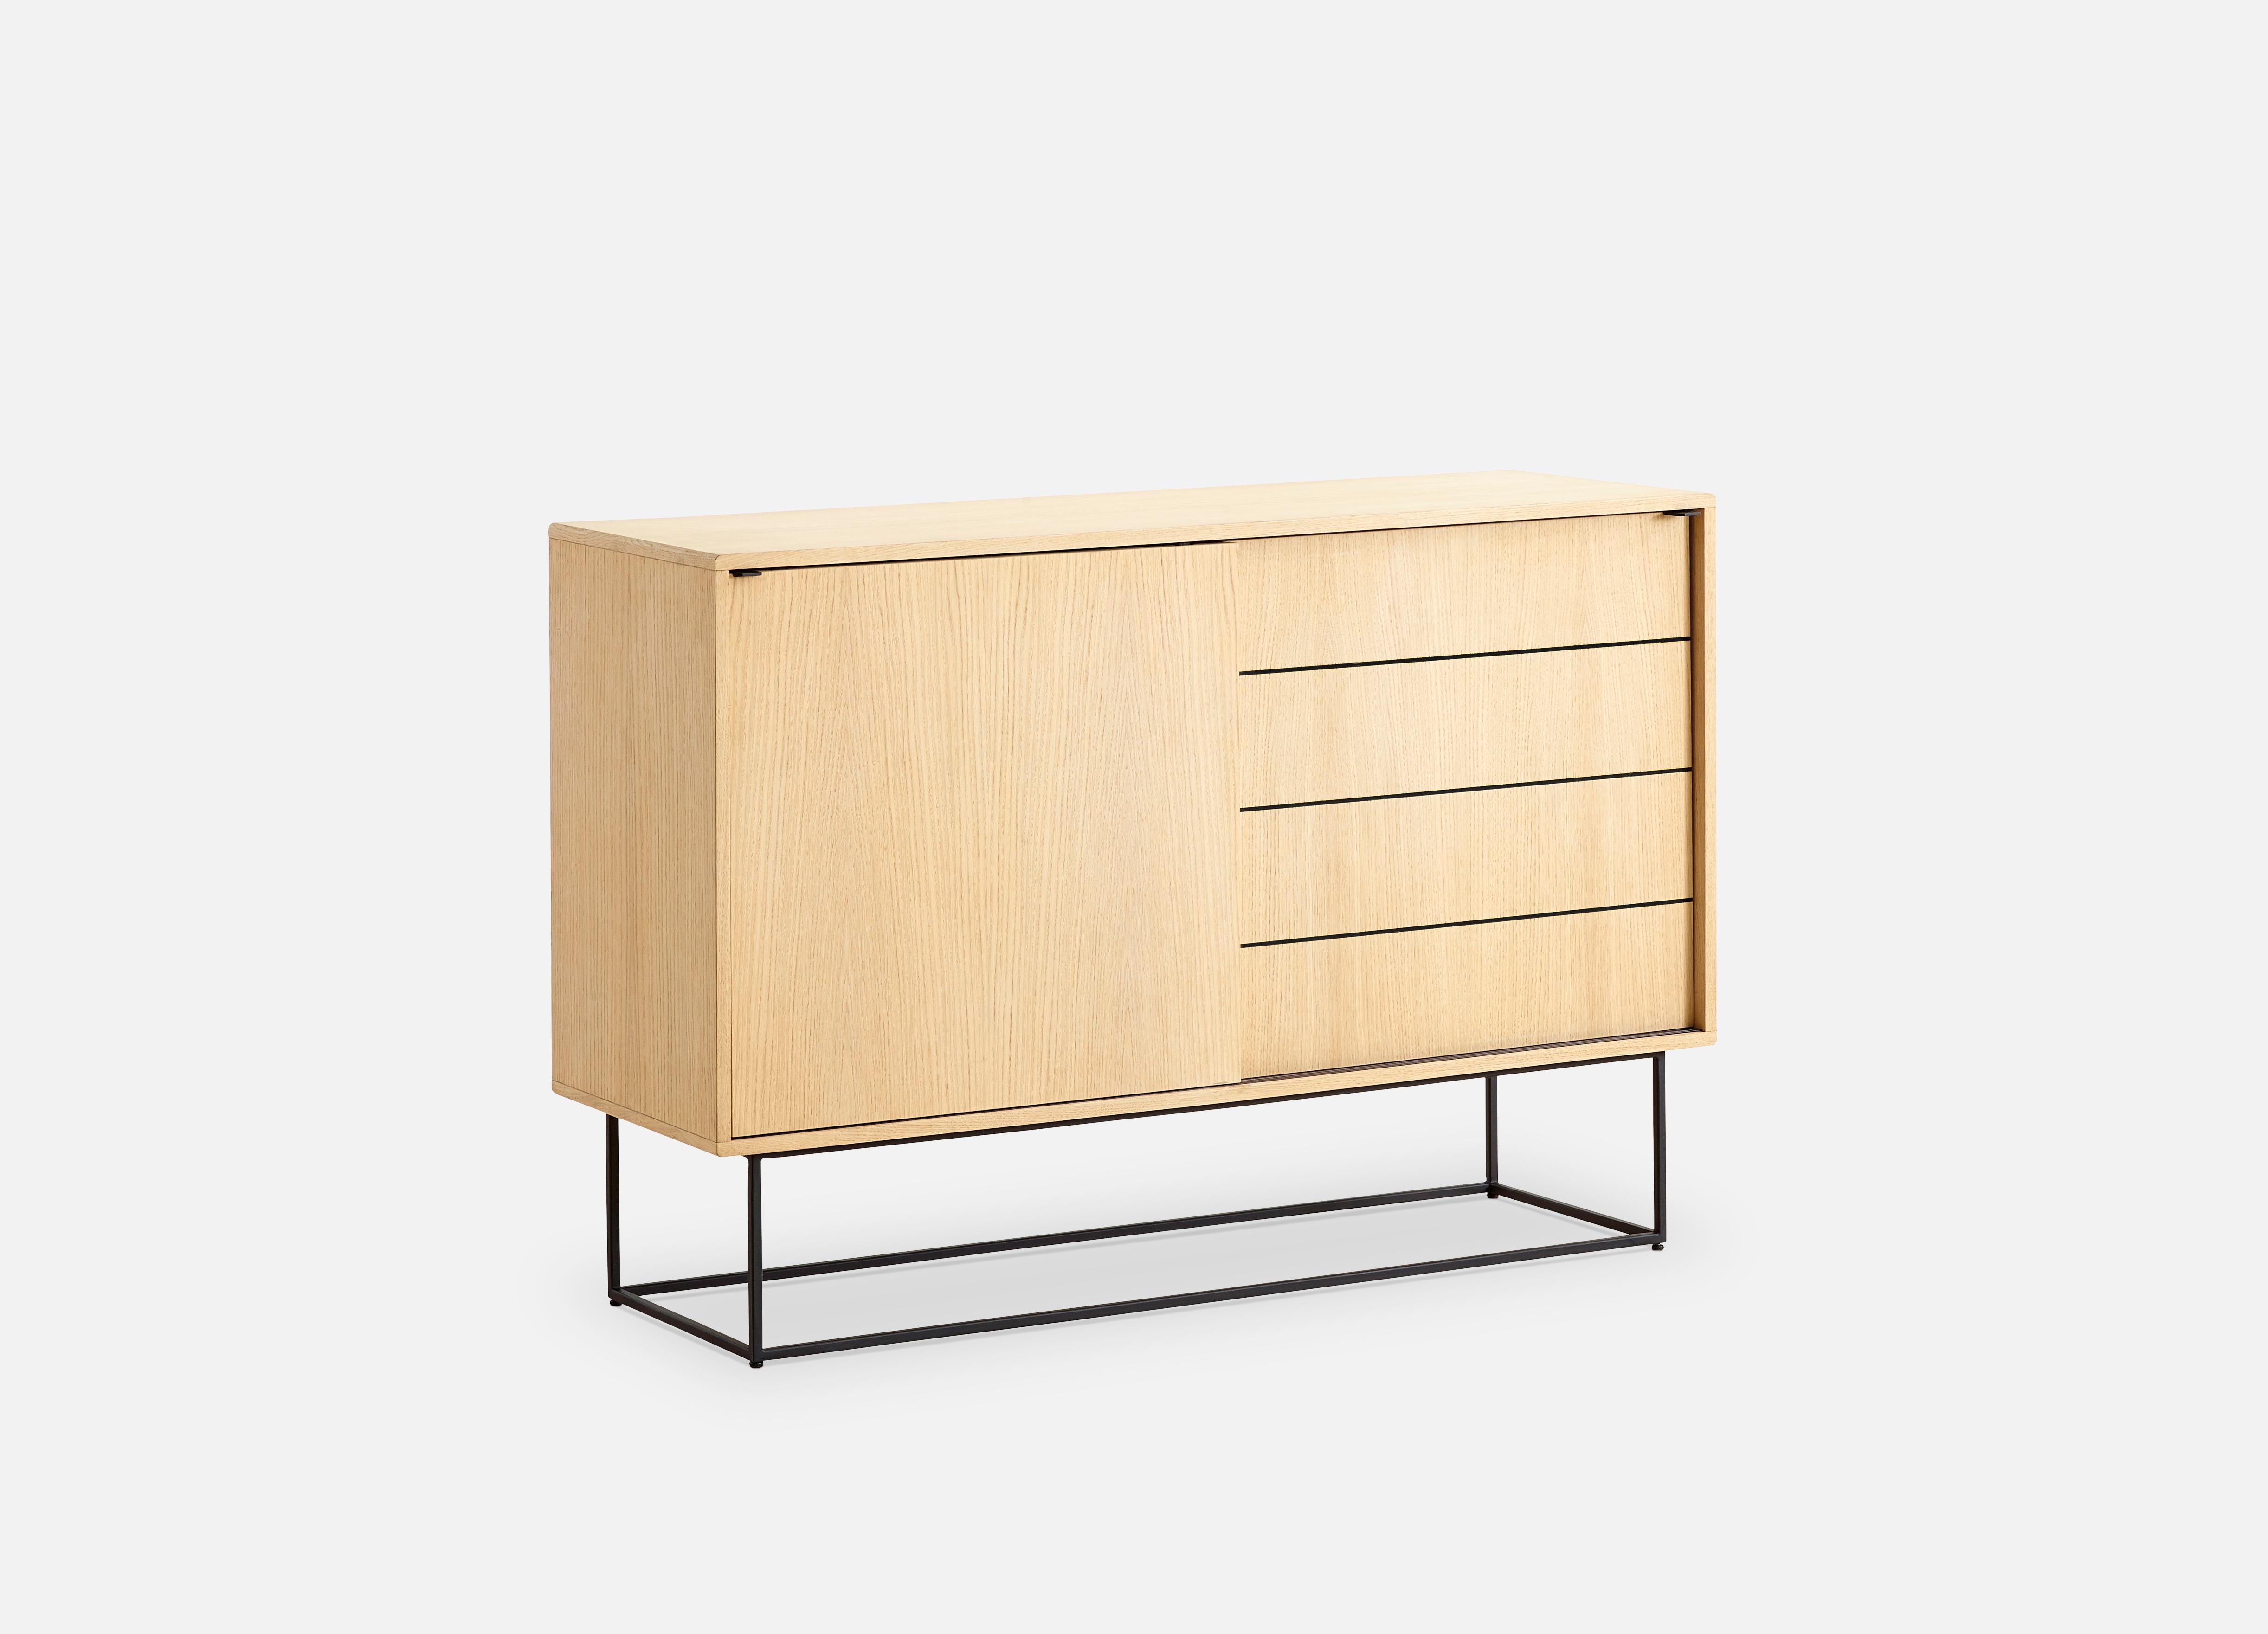 White oak virka high sideboard by Ropke Design and Moaak
Materials: oak, metal.
Dimensions: D 40 x W 120 x H 82 cm
Also available in different colours and materials. 

The founders, Mia and Torben Koed, decided to put their 30 years of